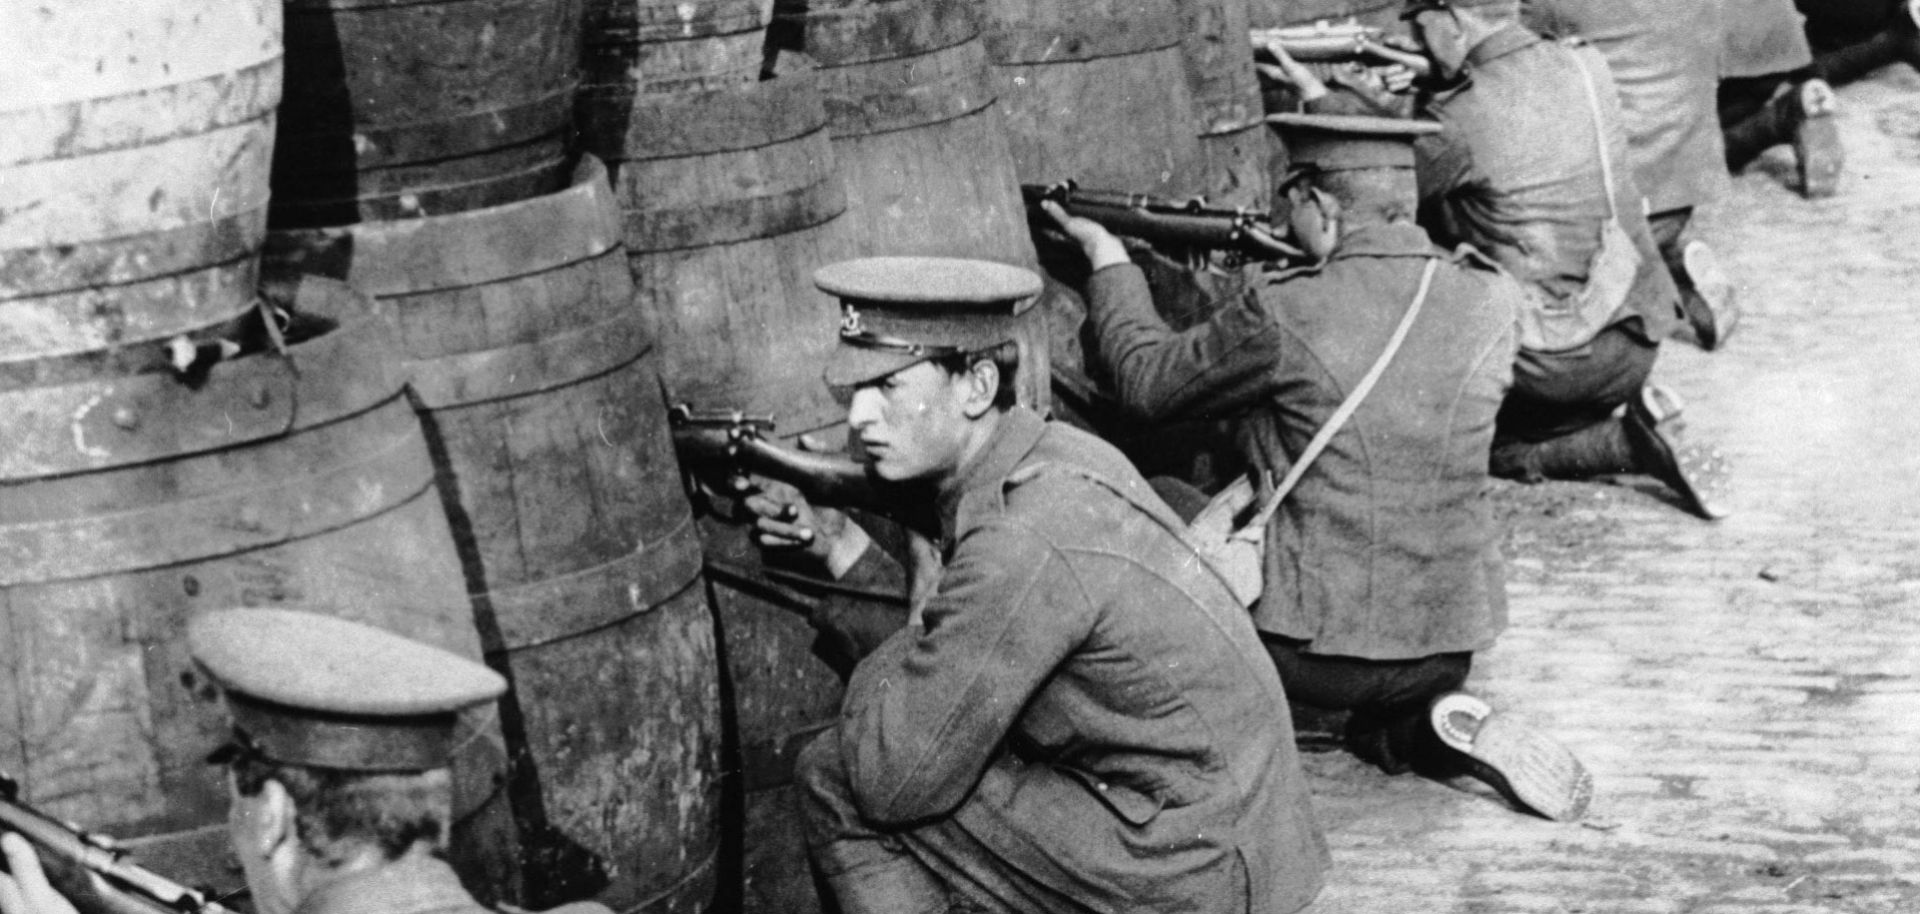 British soldiers sniping from behind a barricade of empty beer casks near the quays in Dublin during the 1916 Easter Rising. 